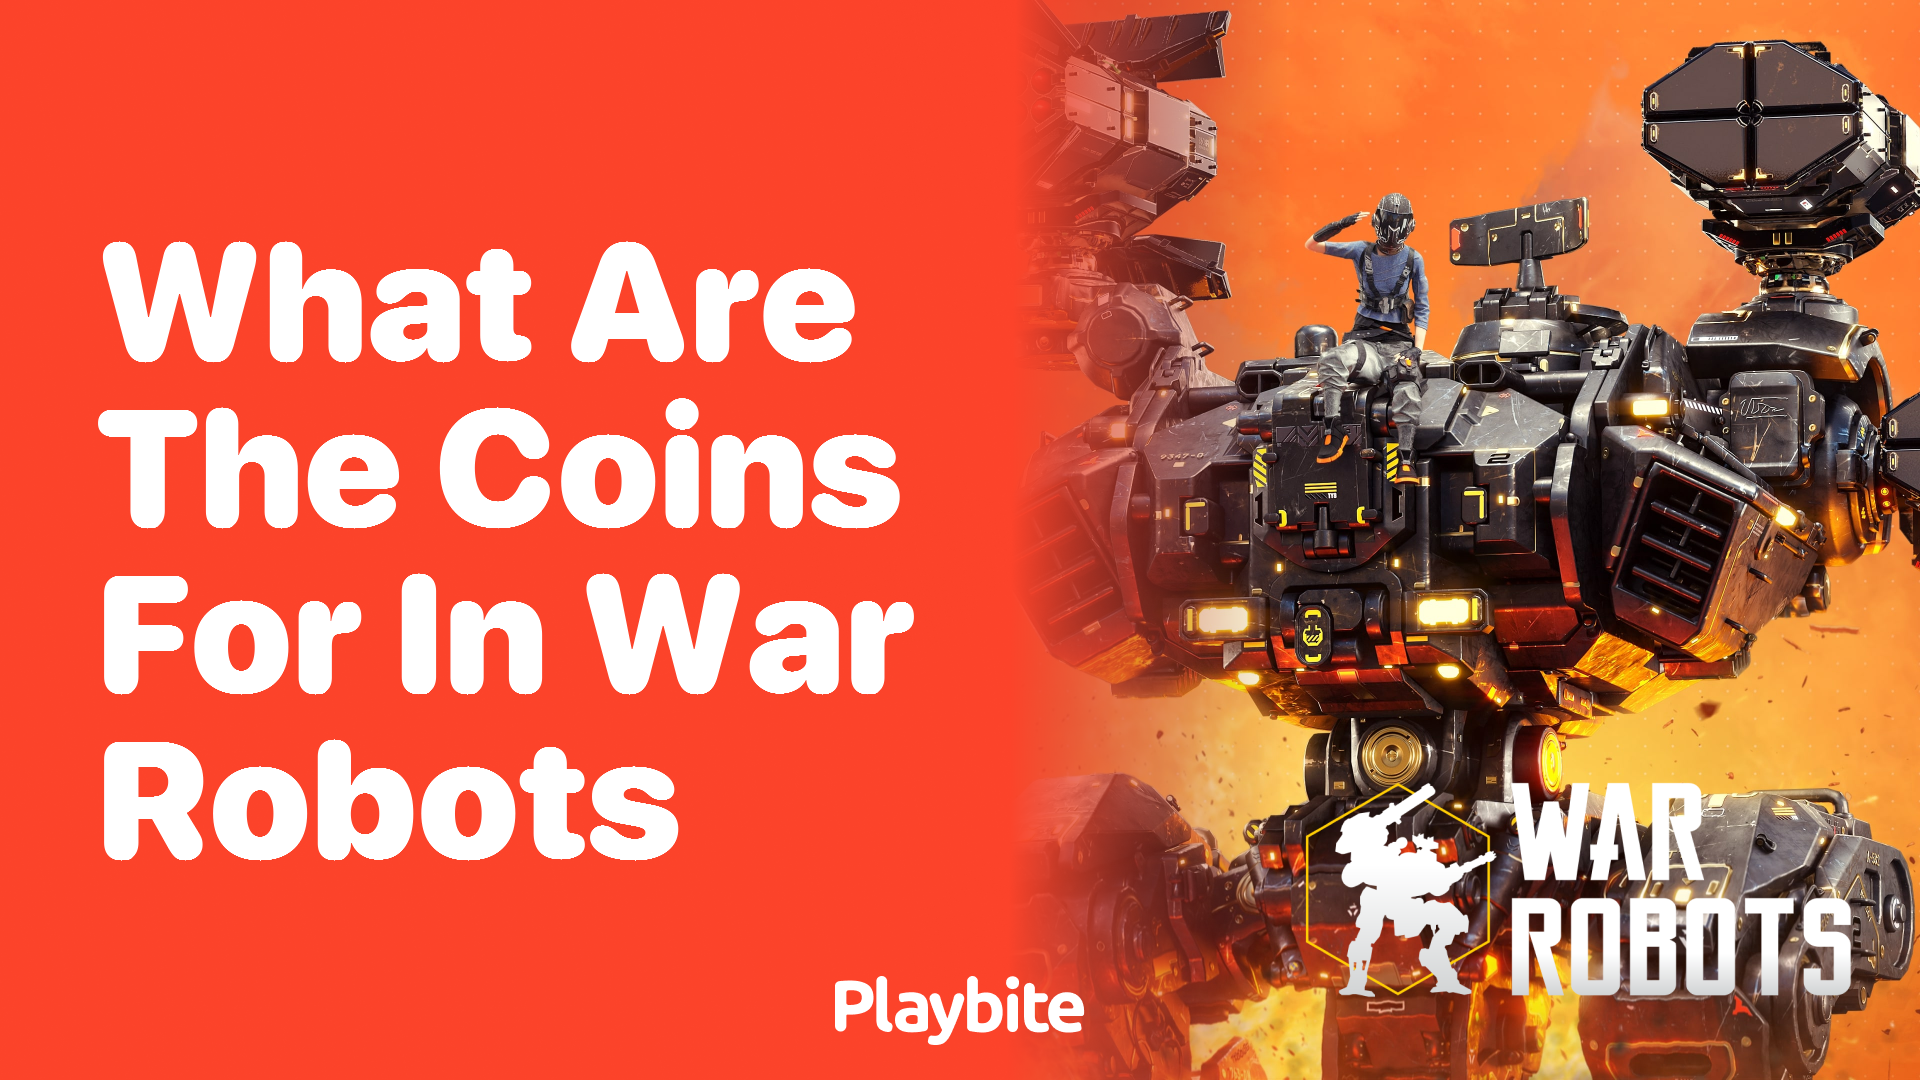 What Are the Coins For in War Robots?